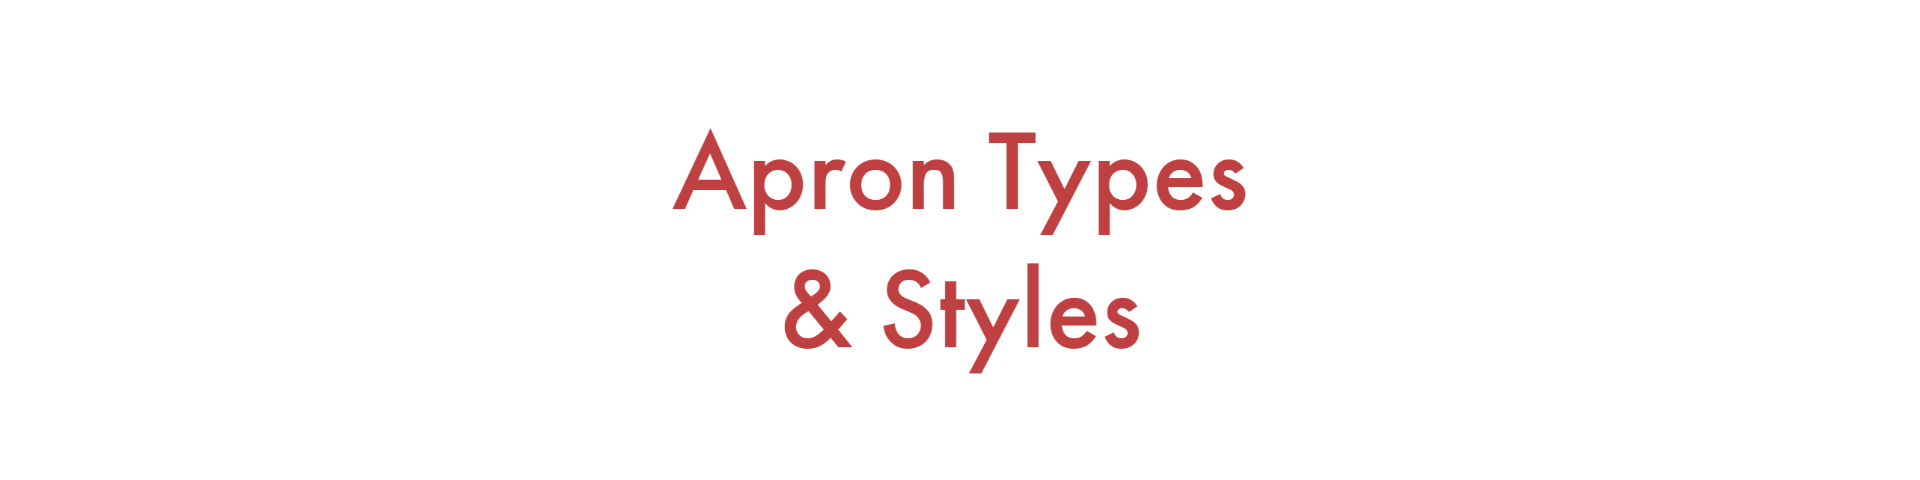 Aprons Types and Styles